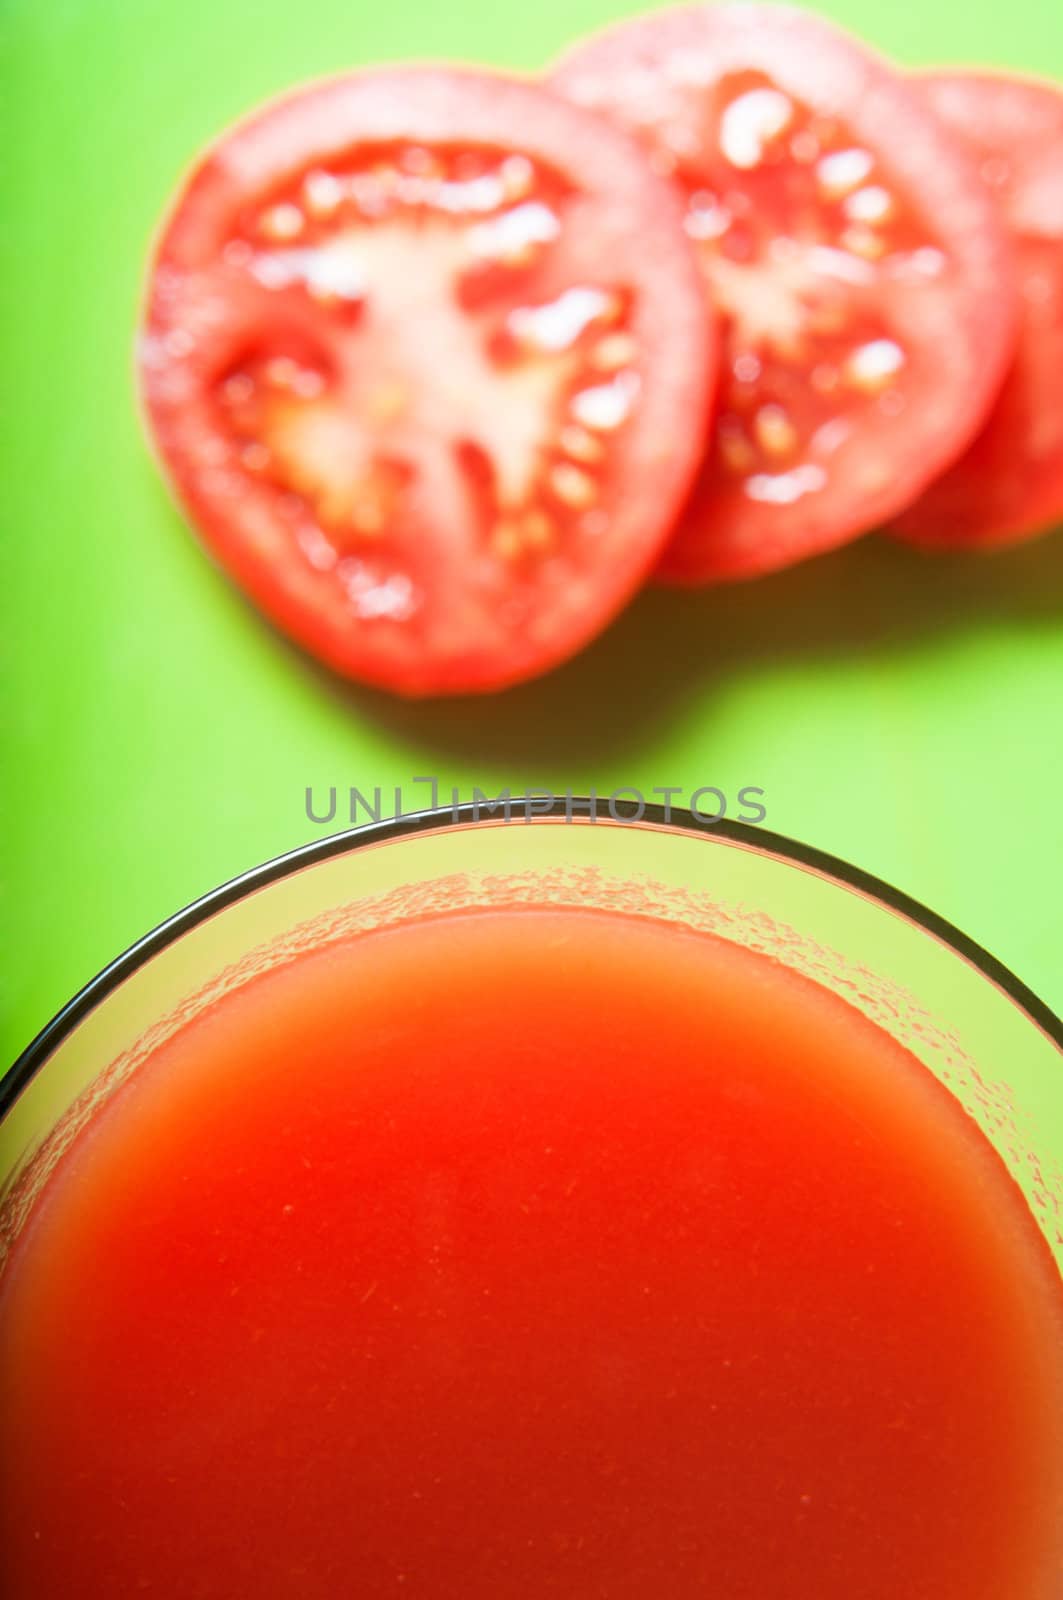 Tomato Juice Overhead by frannyanne